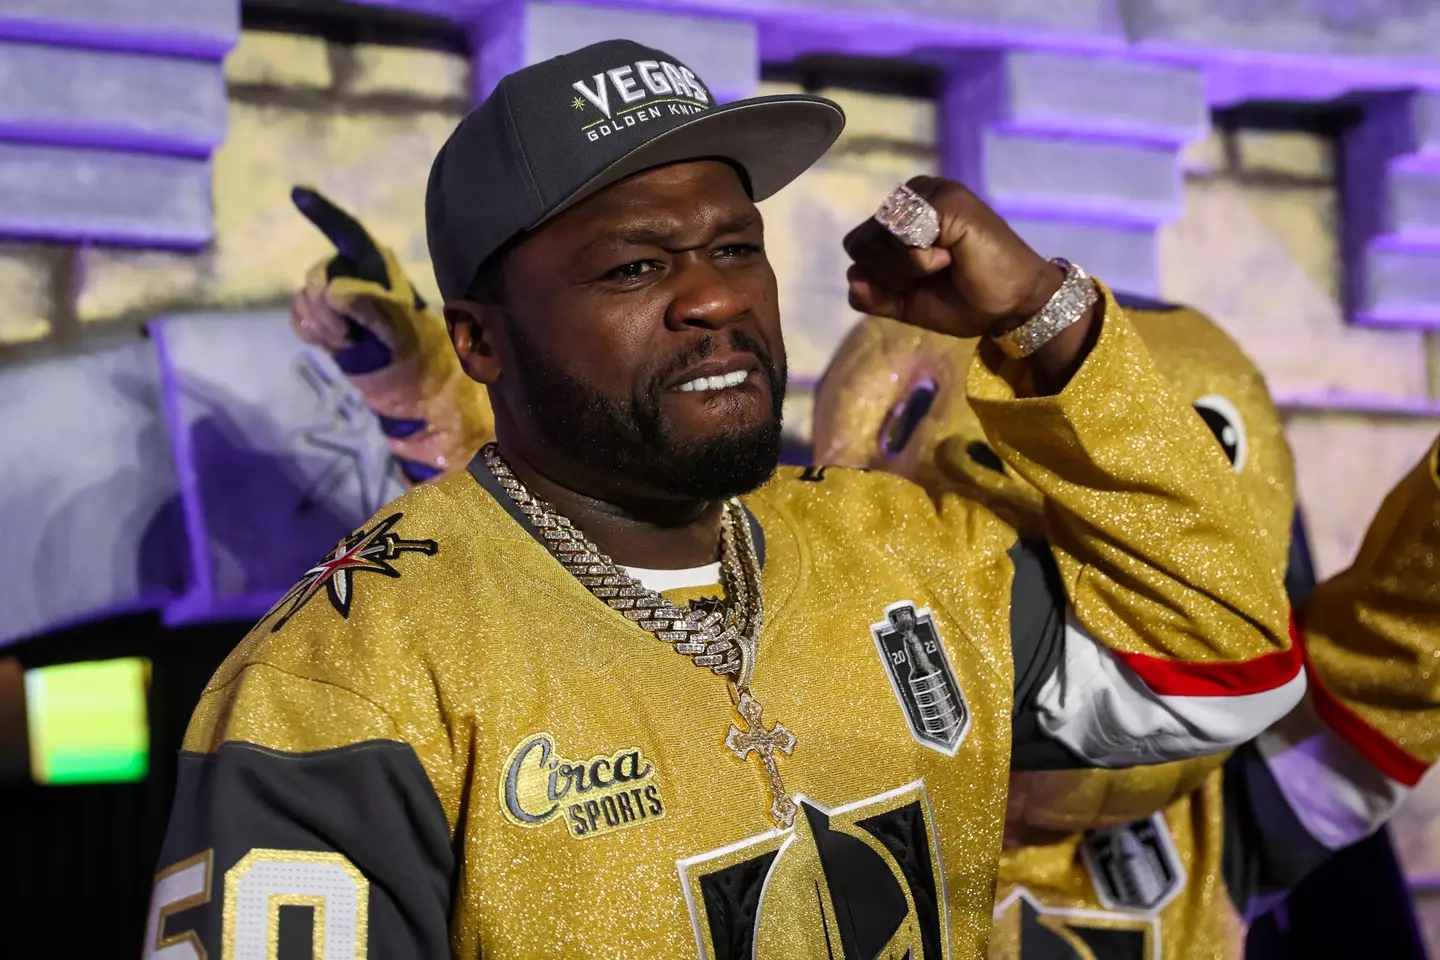 50 Cent purchased 200 tickets to Ja Rules concert, but didn't attend.